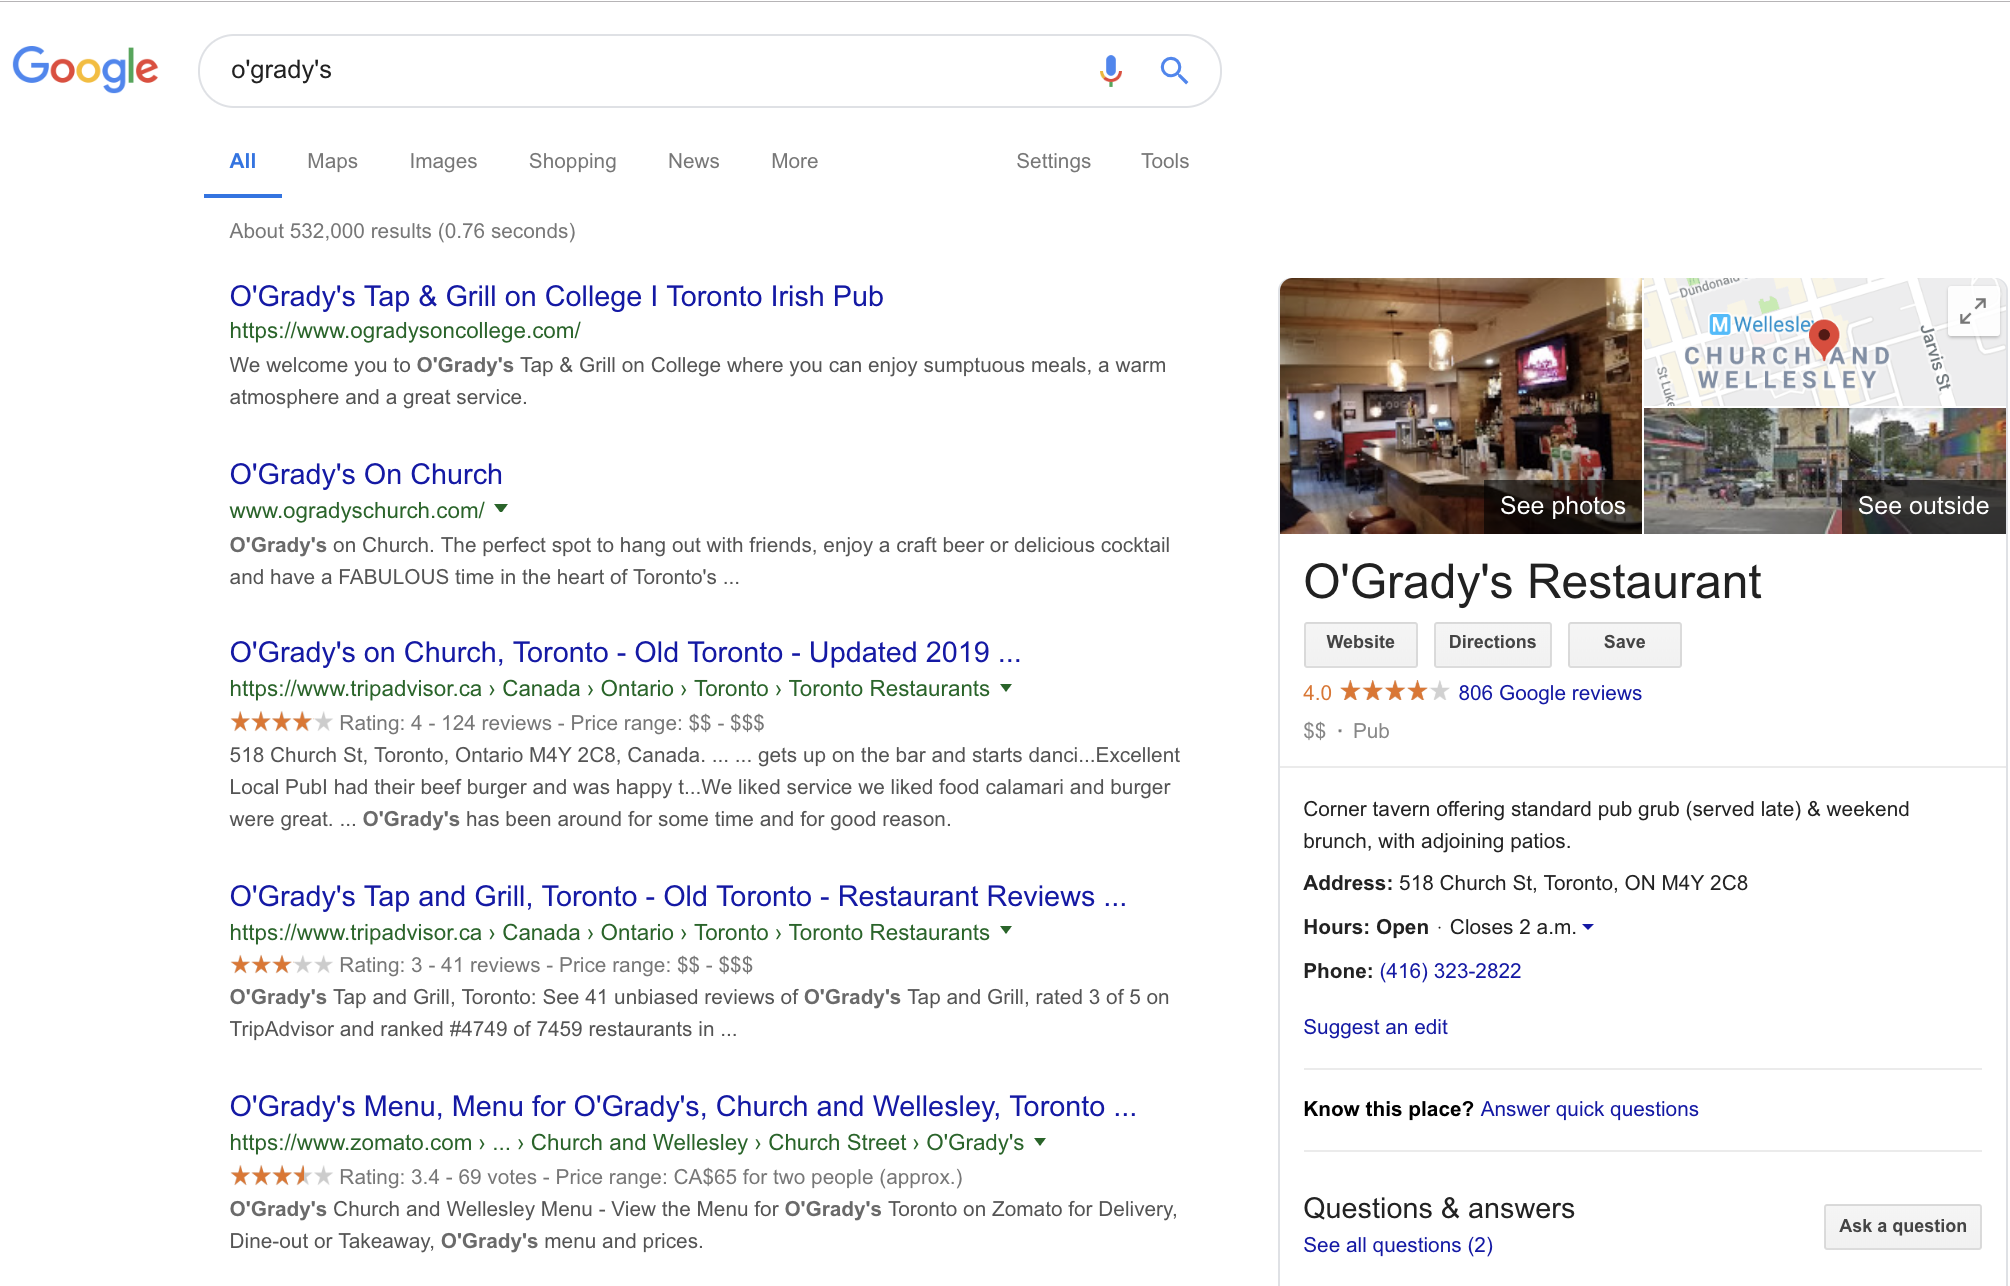 Example of how online reviews left for a restaurant by customers show up in Google search.